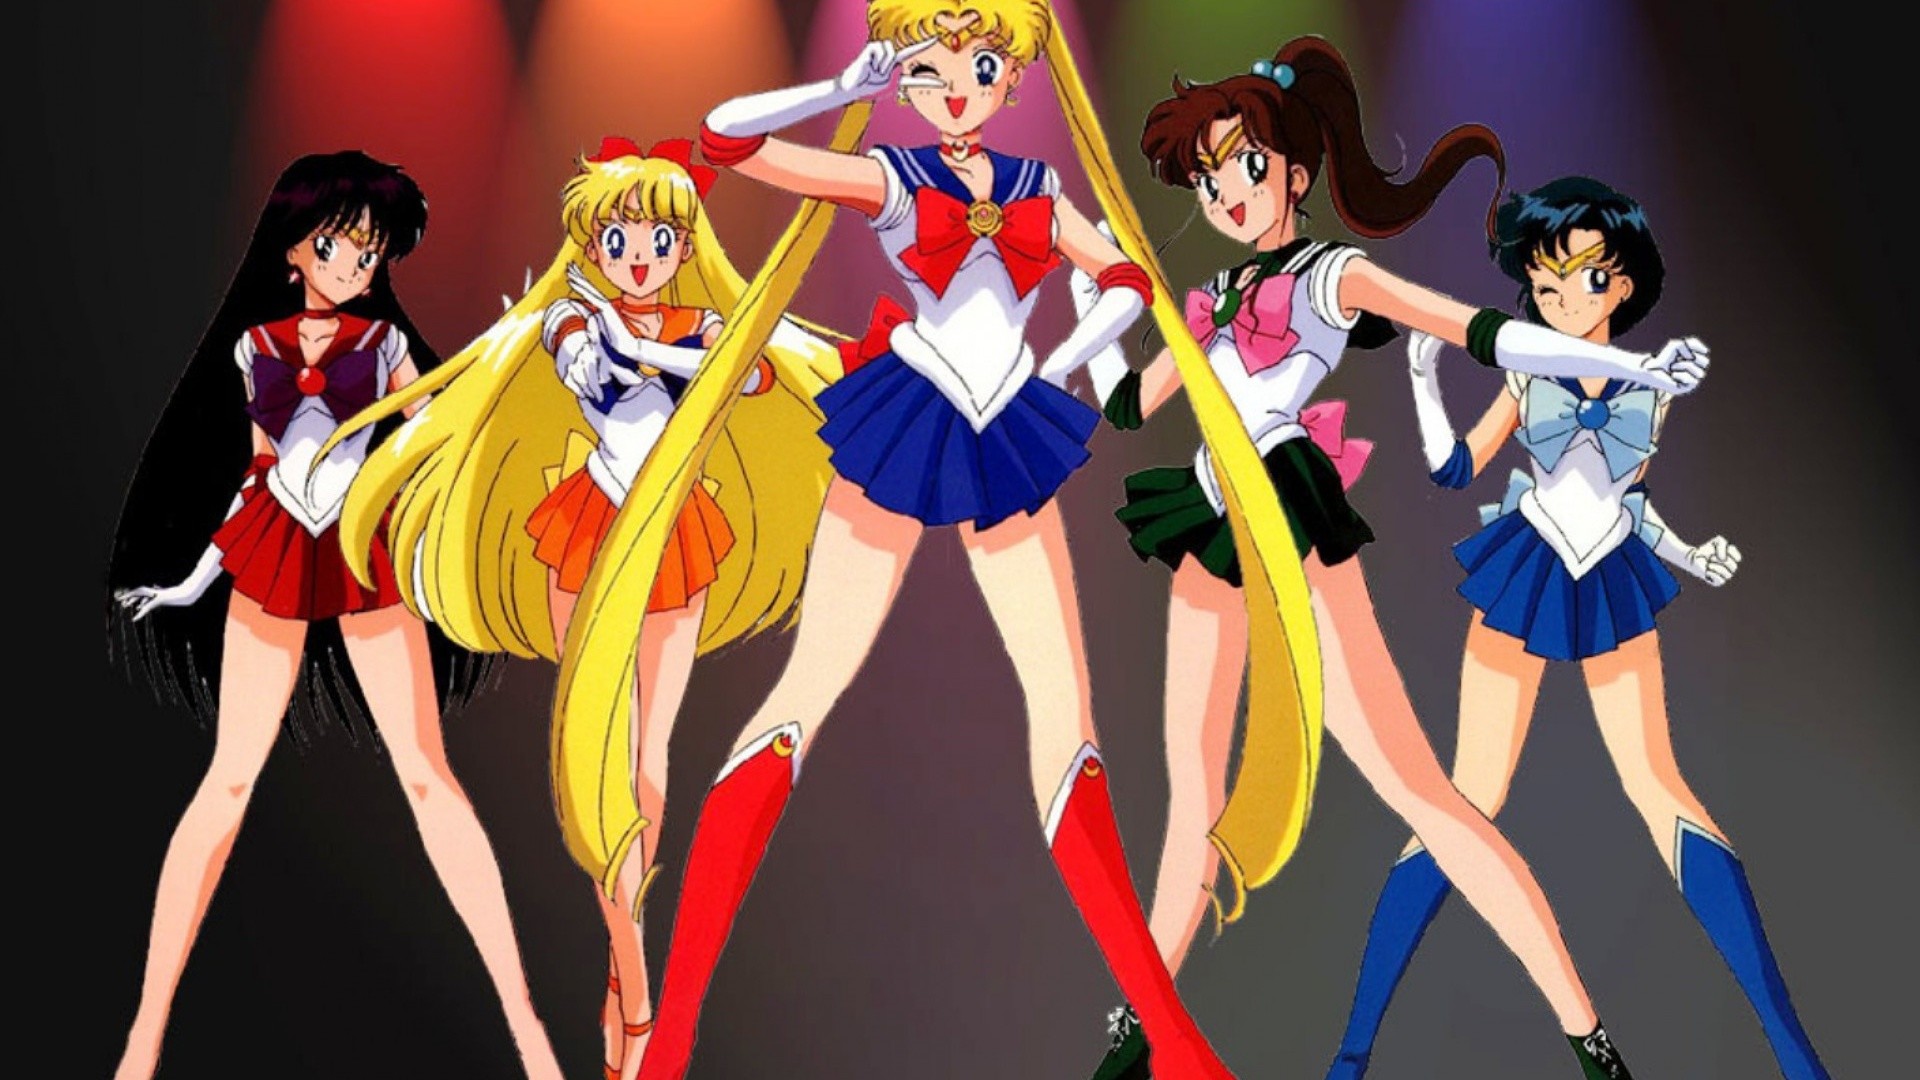 HD Quality Creative Sailor Moon Pictures